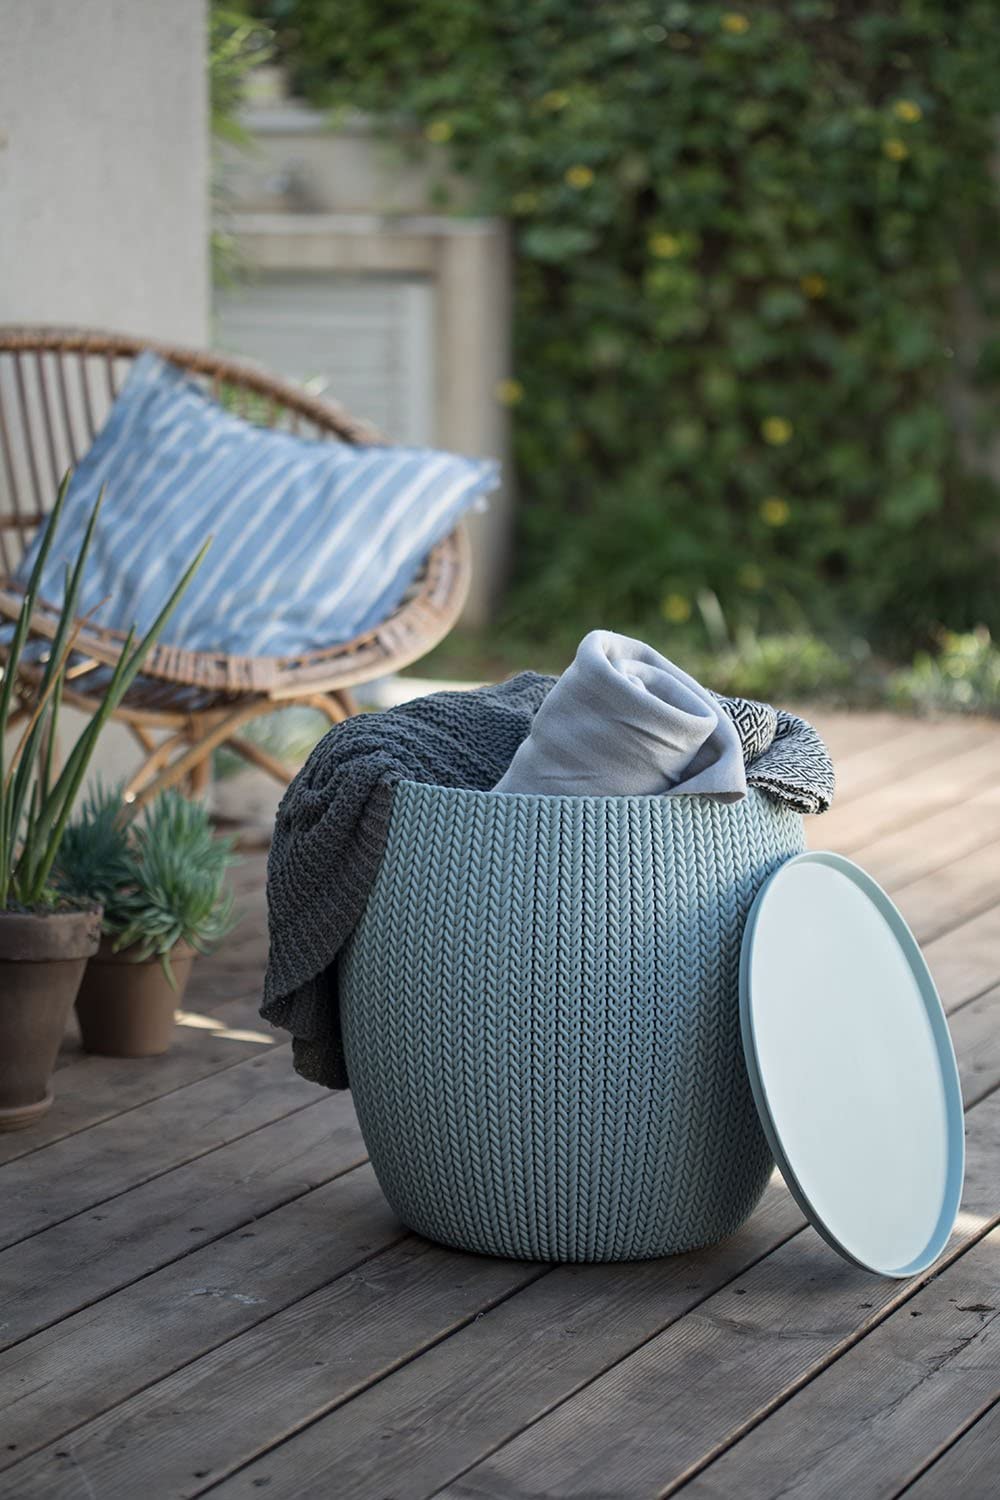 Keter-Urban-Knit-2 15 Unique Furniture Designs for Outdoor Small Spaces